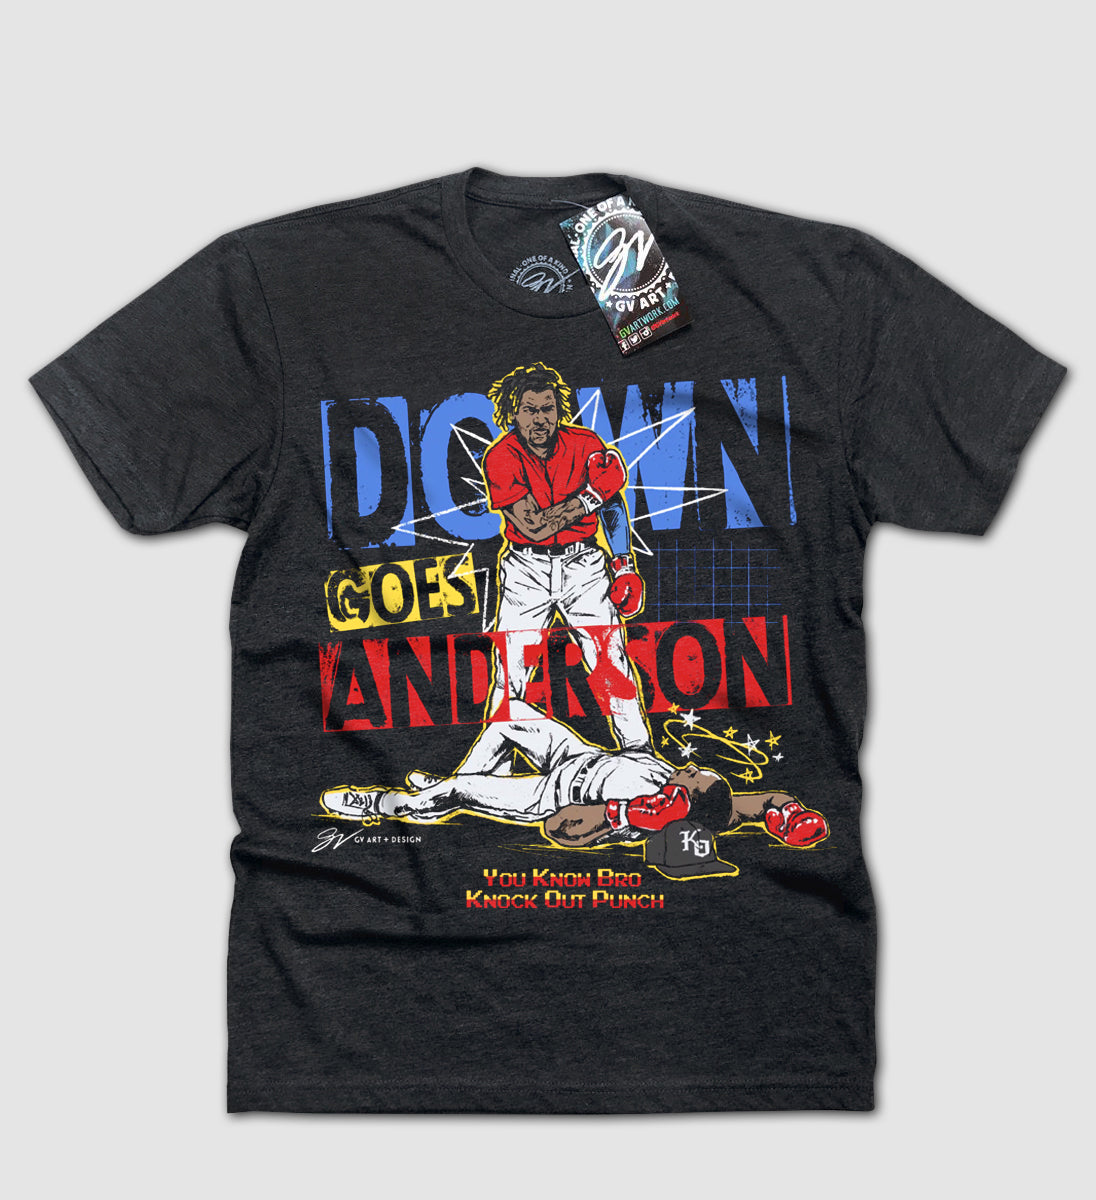 Down Goes Anderson Limited Edition T Shirt